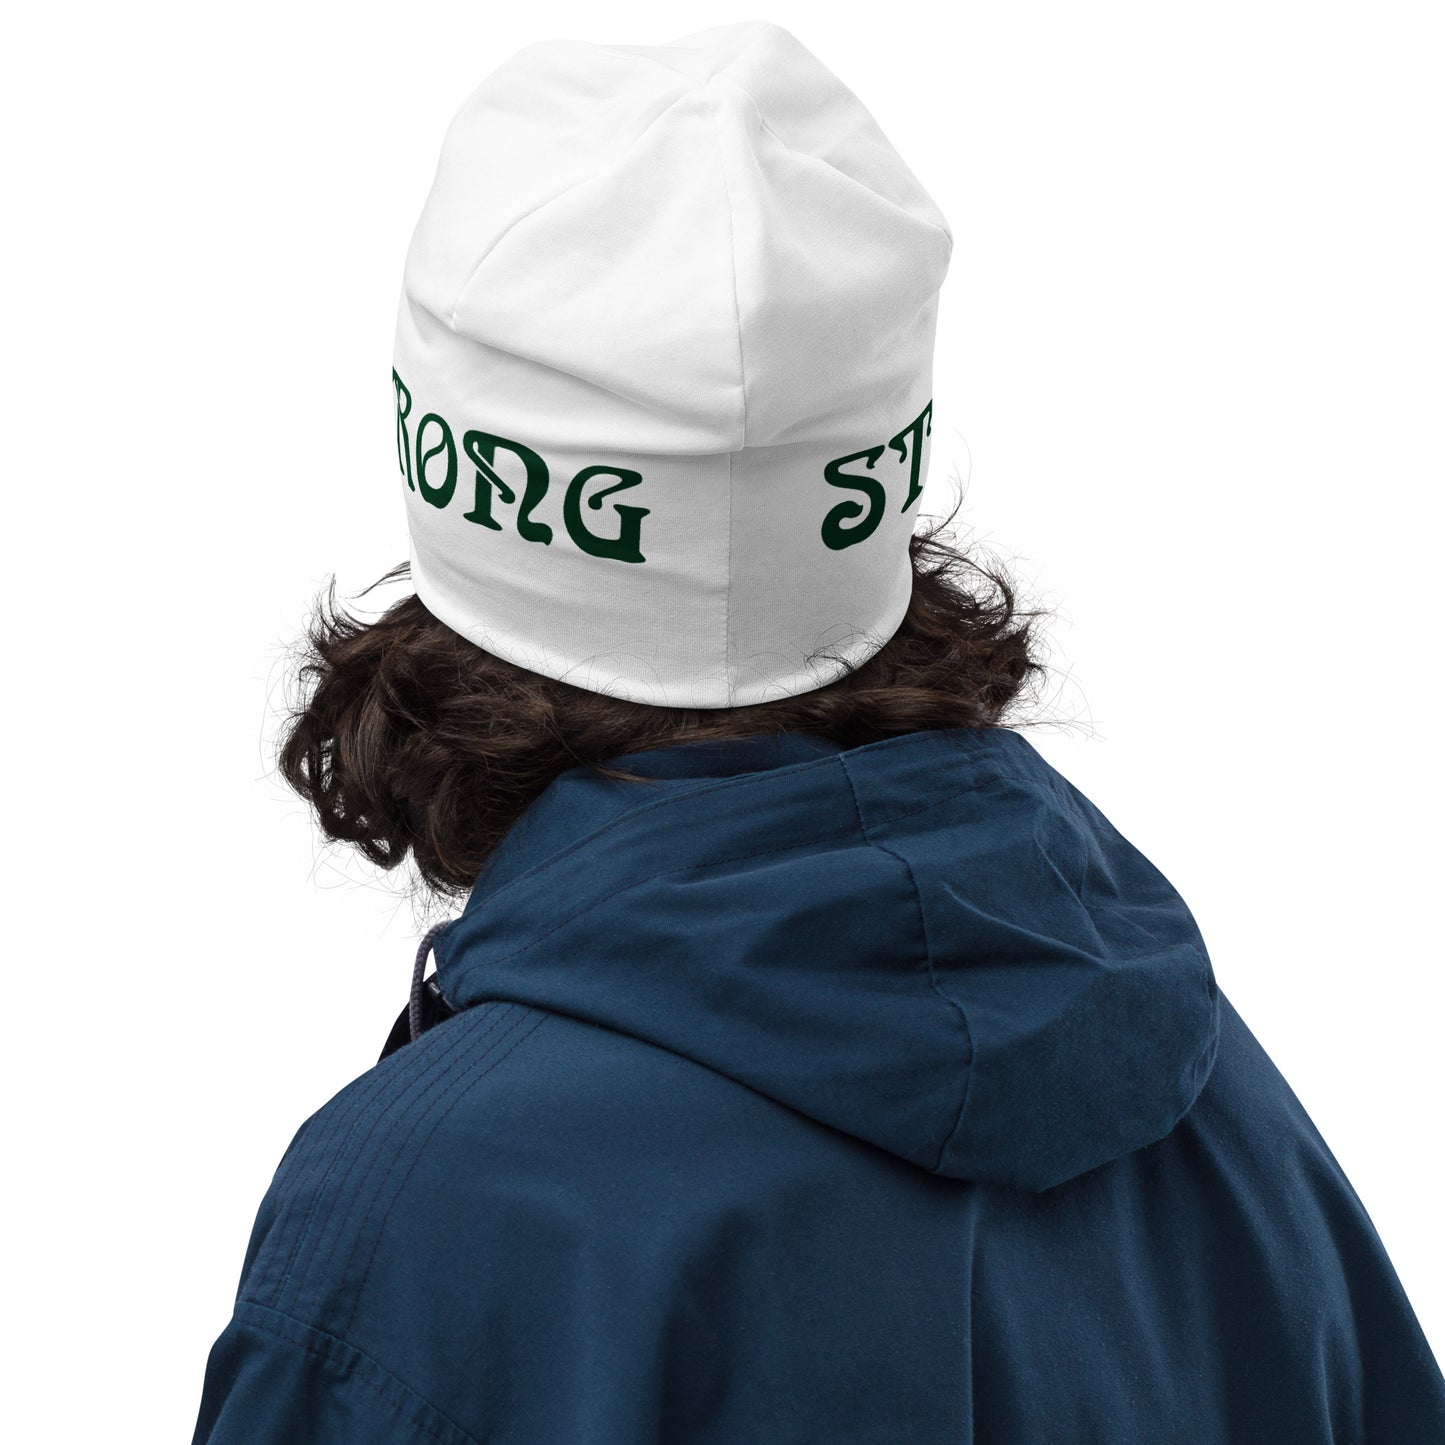 'STRONG"White Beanie W/Green Font